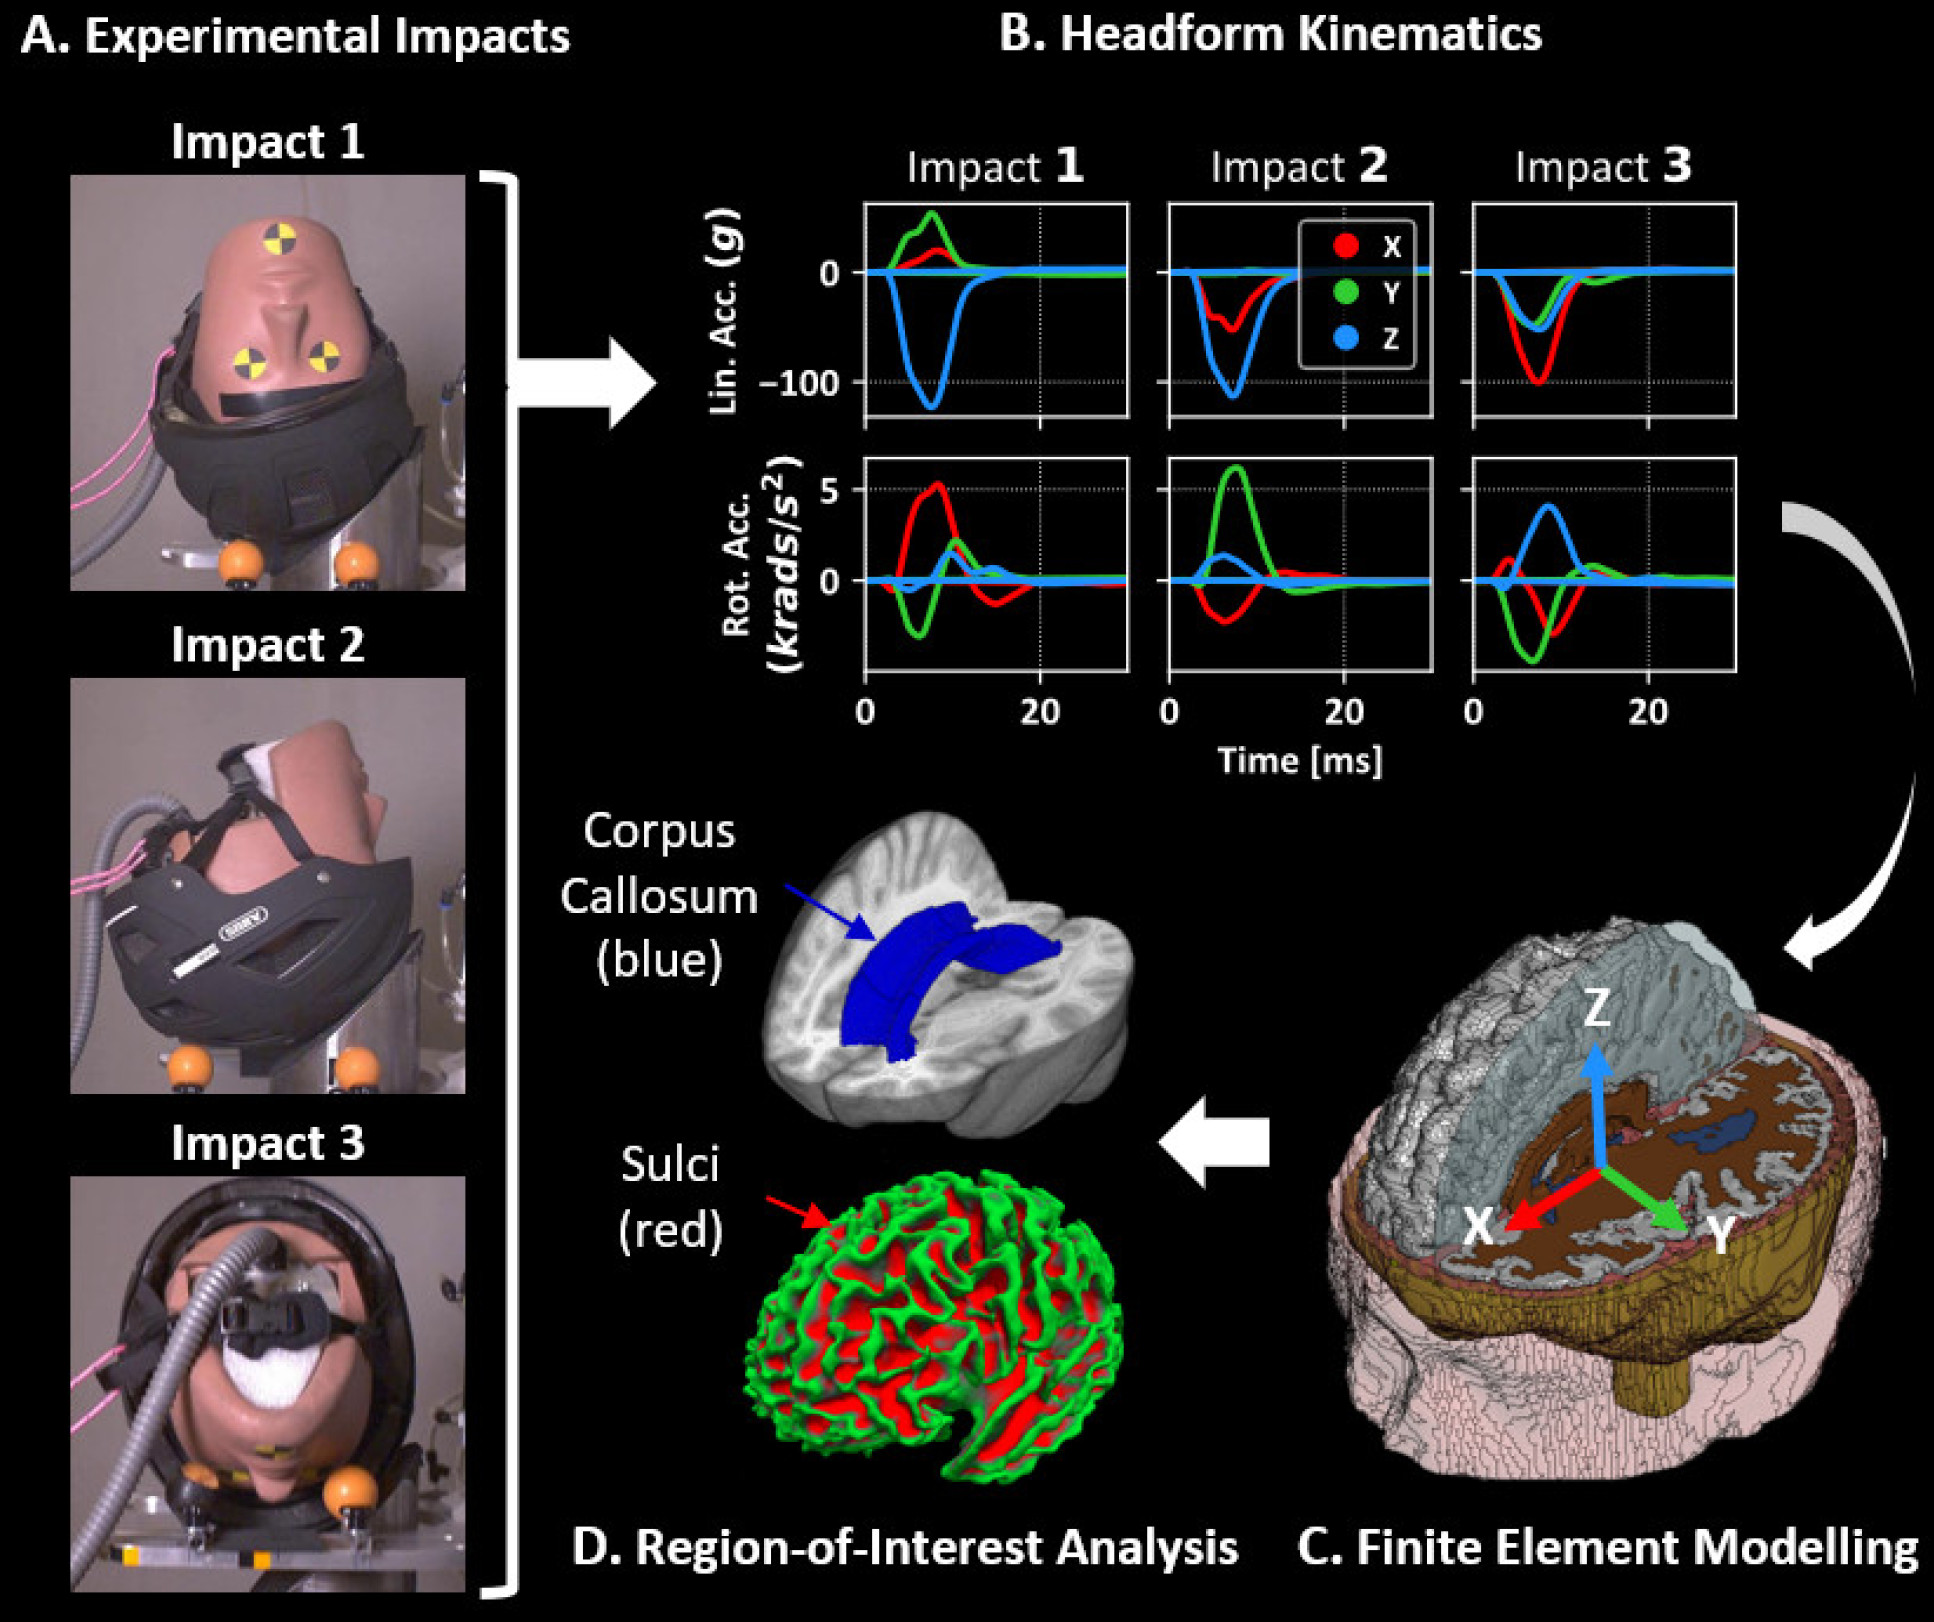 Photo showing helmeted dummy heads being dropped headfirst, side-first, and back-first onto a 45° inclined anvil. Also shown is the corpus callosum and sulci in subsequent brain scans, and the kinematics of each impact are represented by graphs